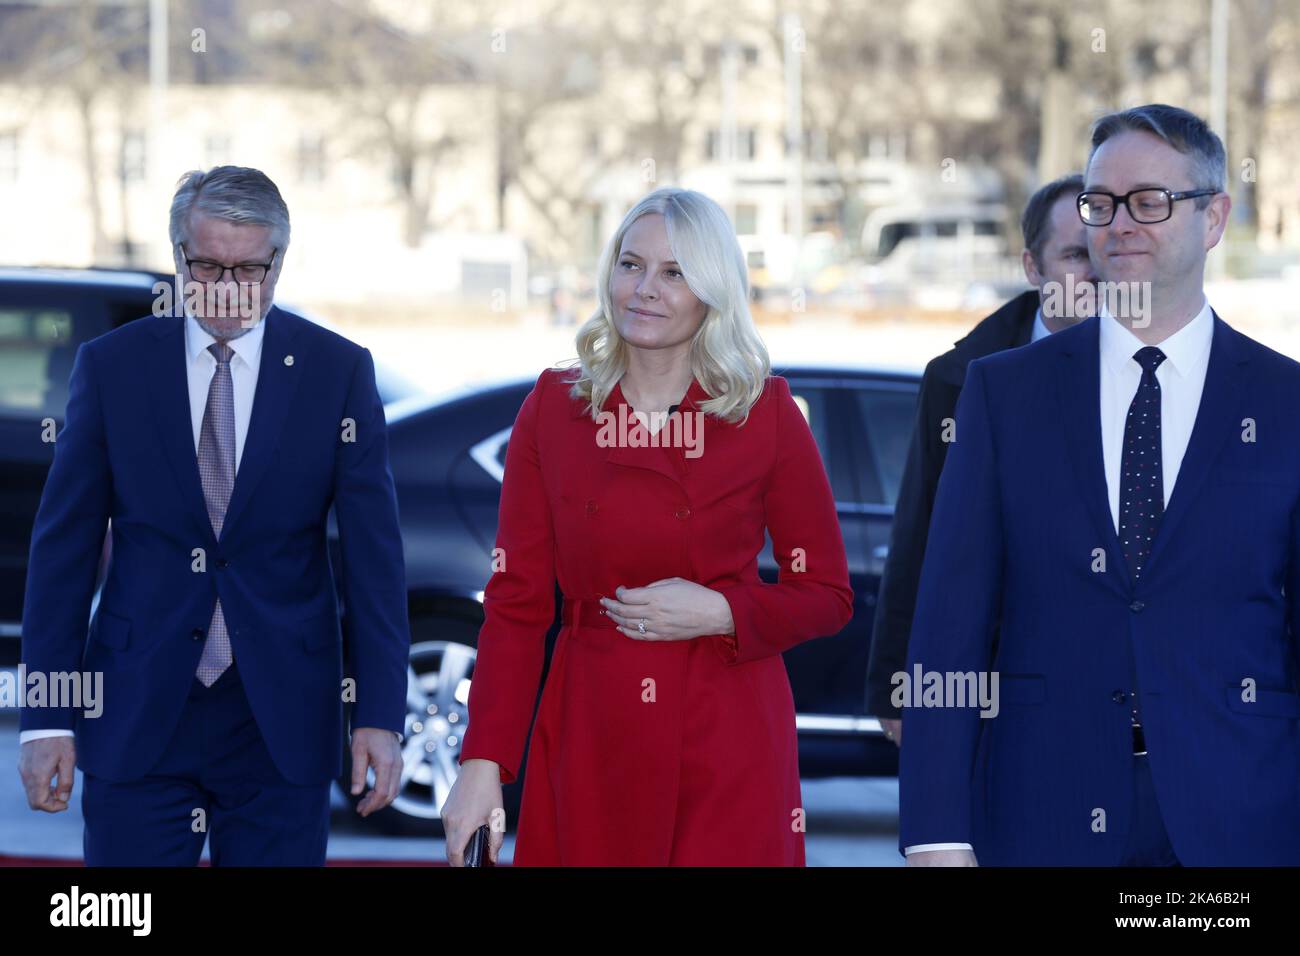 OSLO, Norway 20150312. Crown Princess Mette-Marit arrive the Opera to participate in the commemoration of NIMA Norwegian Association of Purchasing and Logistics 100th anniversary. The Crown Princess was greeted by Mayor Fabian Stang (left), Chairman of Nima Svein-Egil Holberg and Adm. Director at the Norwegian Opera Nils Are Kartad Lysoe. Photo: Cornelius Poppe / NTB scanpix Stock Photo